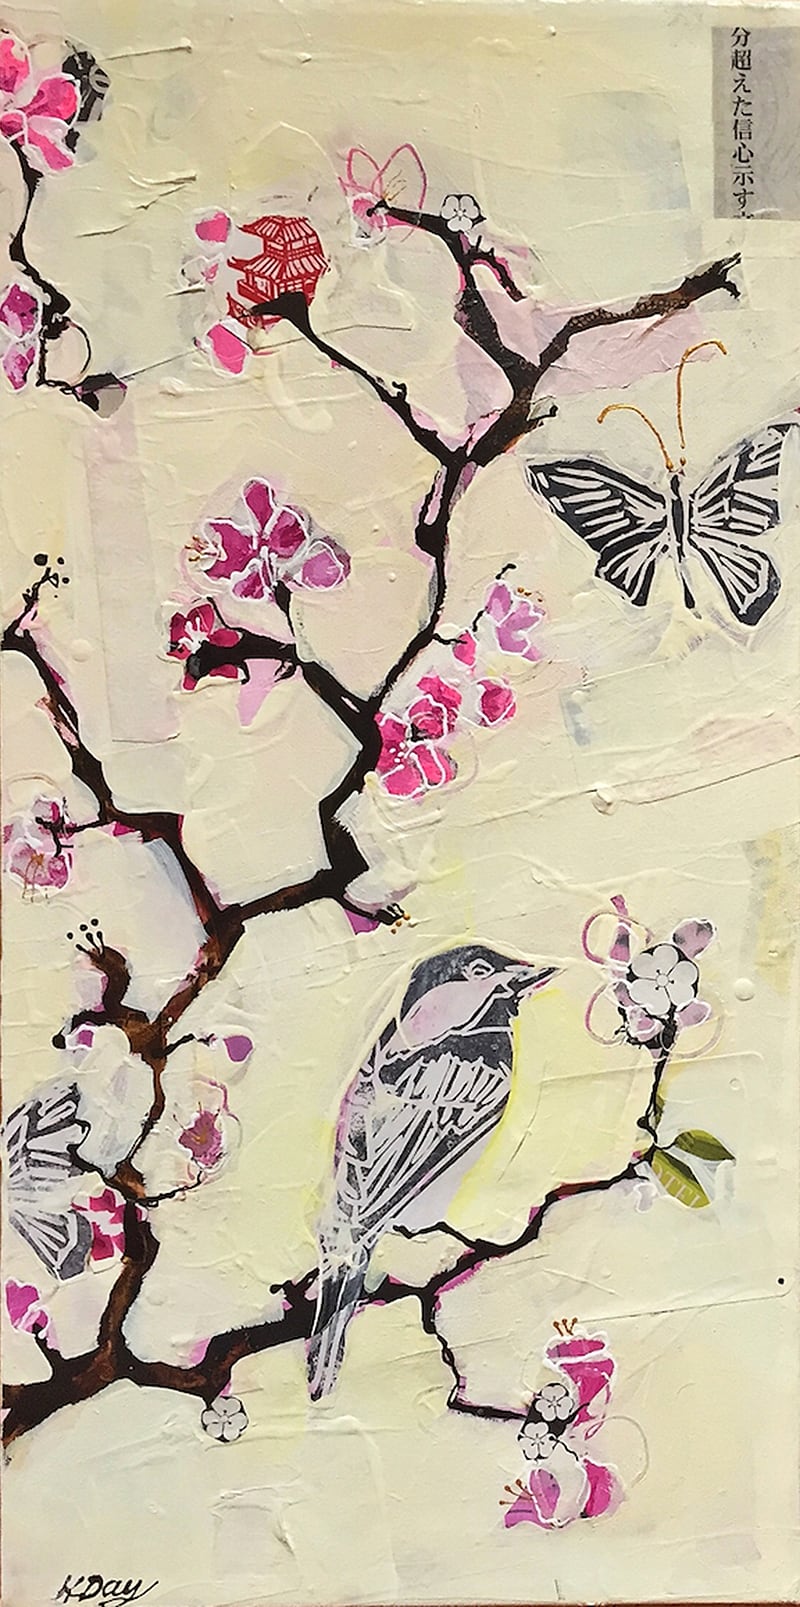 Yellow Bird, mixed media on canvas ©Kellie Day, 12" x 24", available